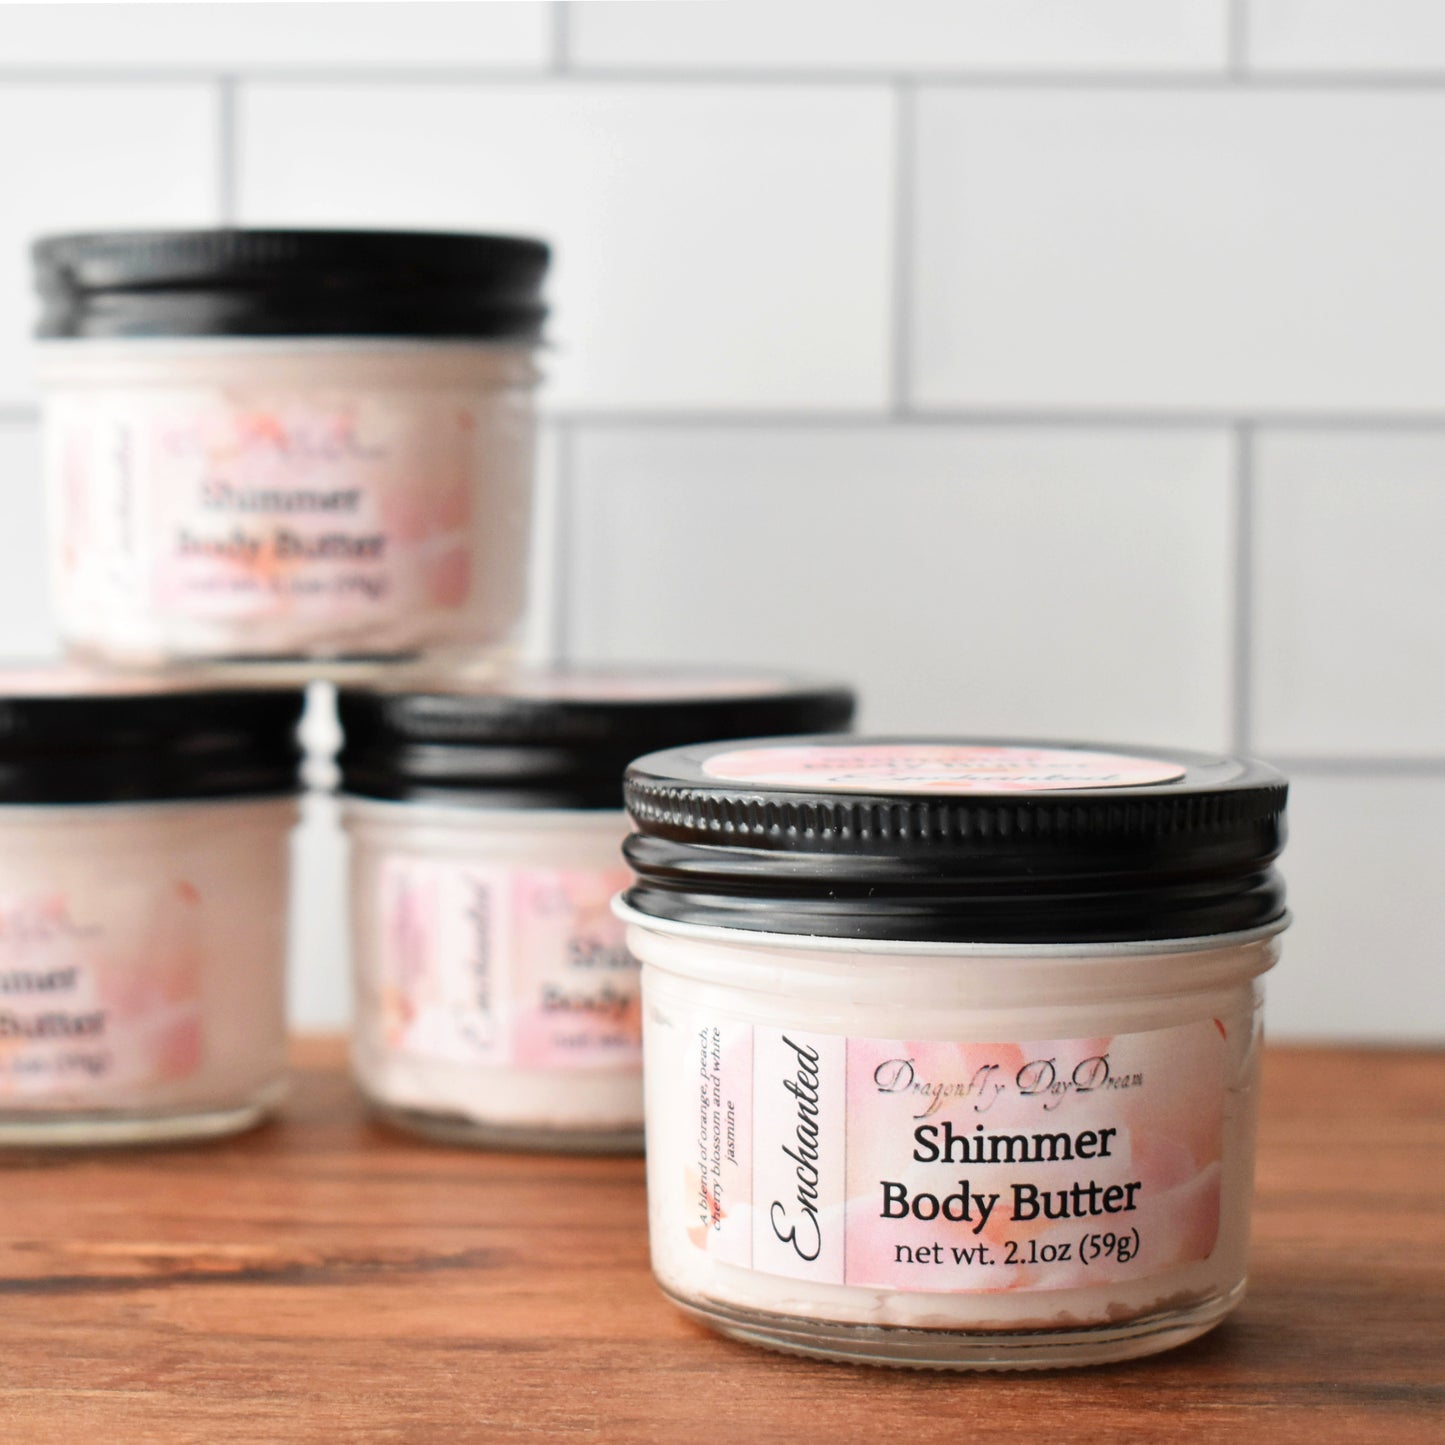 1 jar of shimmer body butter in the foreground with black lid and labeled “Enchanted Shimmer Body Butter, Dragonfly DayDream, net wt. 2.1oz (59g)” on a medium brown wood table and a white subway tile background.  Also in background are 3 jars of body butter out of focus.